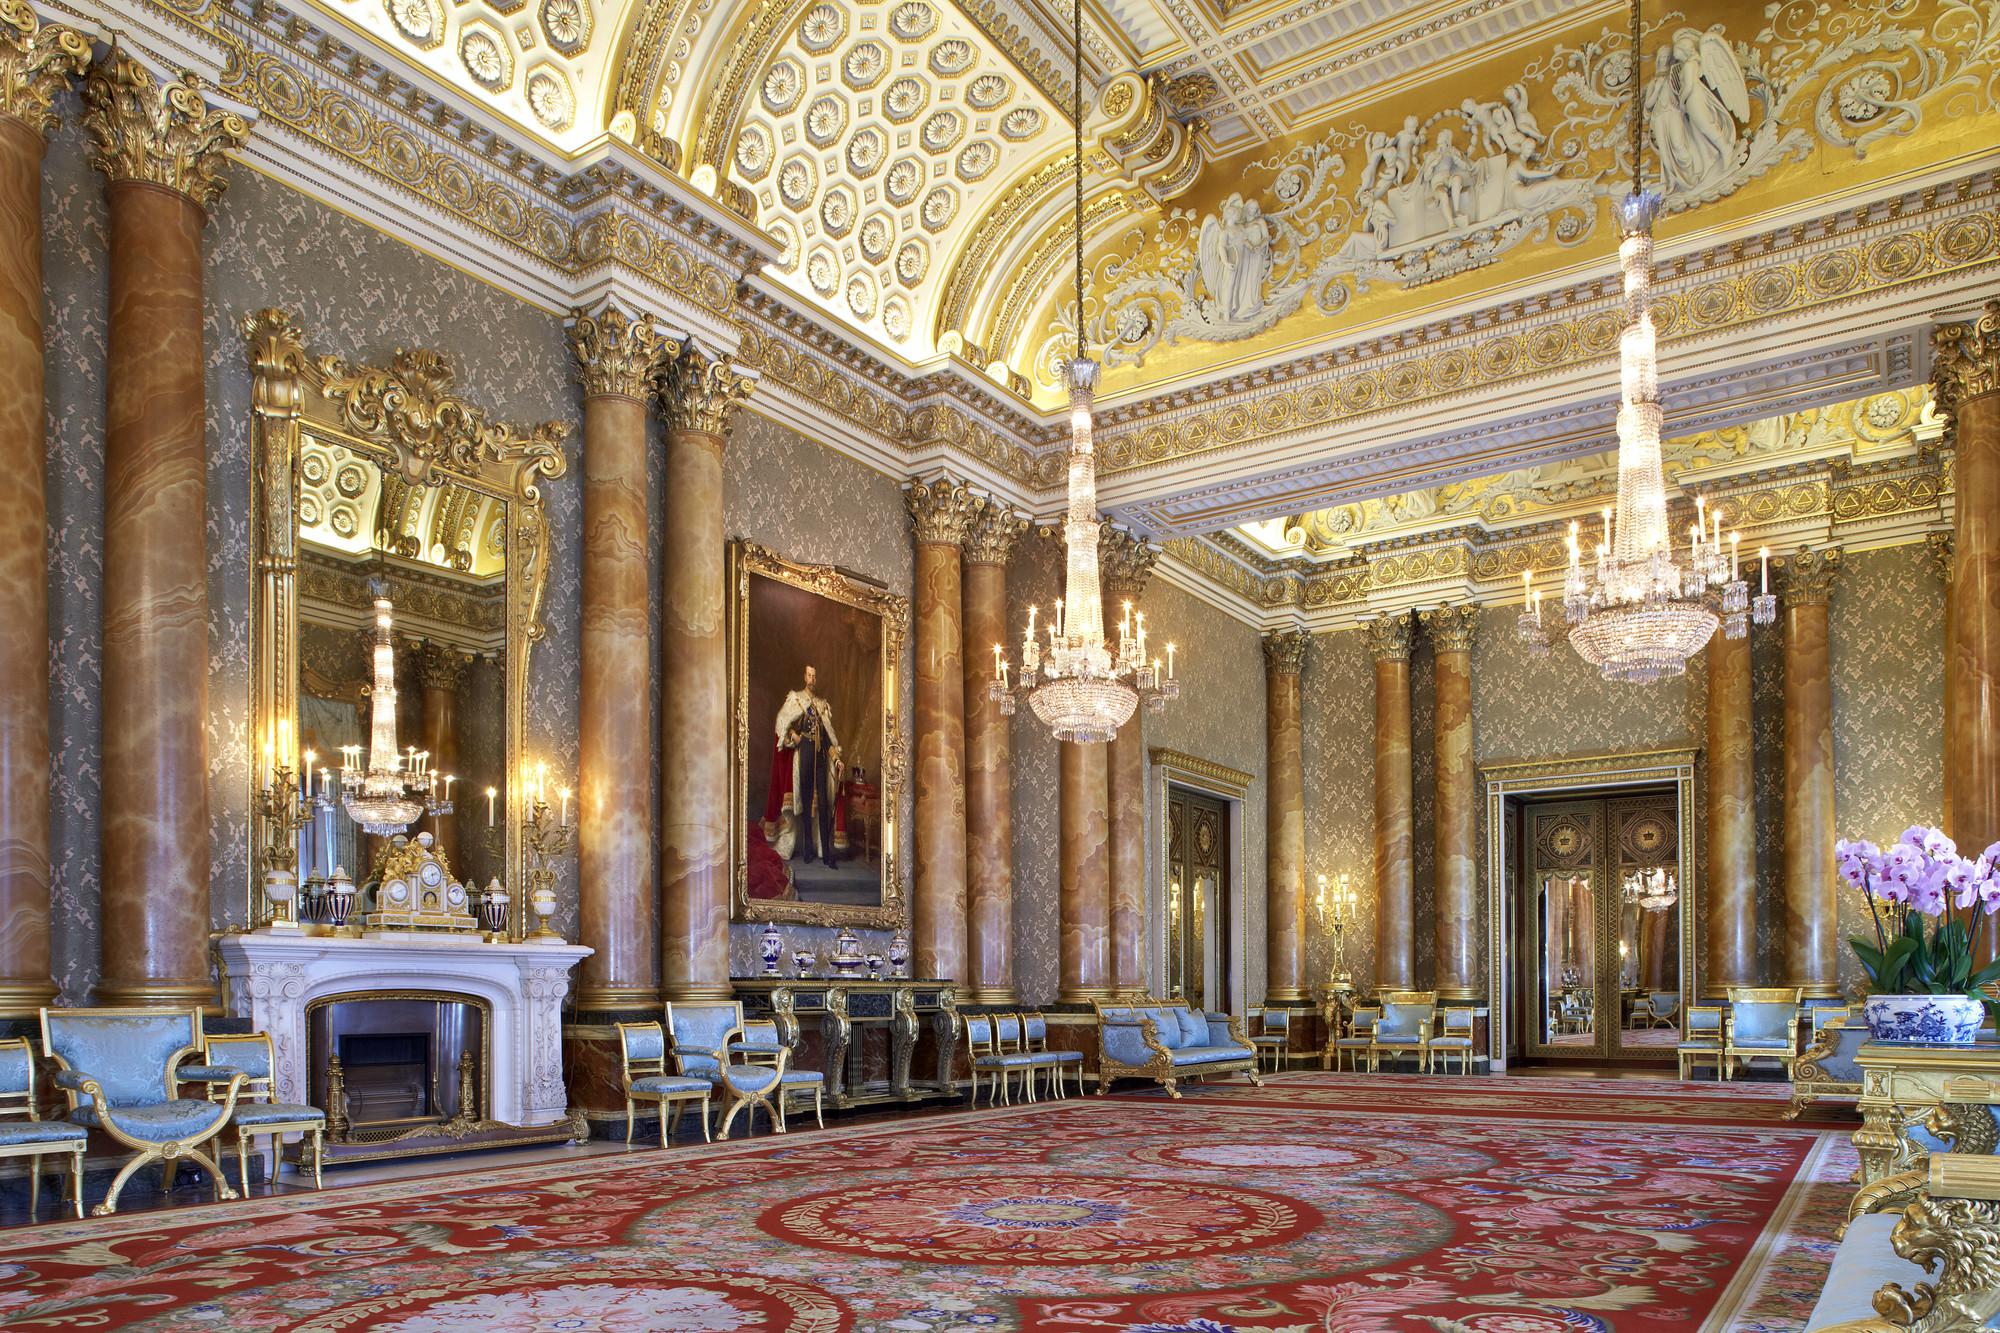 The Blue Drawing Room at Buckingham Palace (Photo credit: Royal Collection Trust / © Her Majesty Queen Elizabeth II 2021. Photographer: Peter Smith)